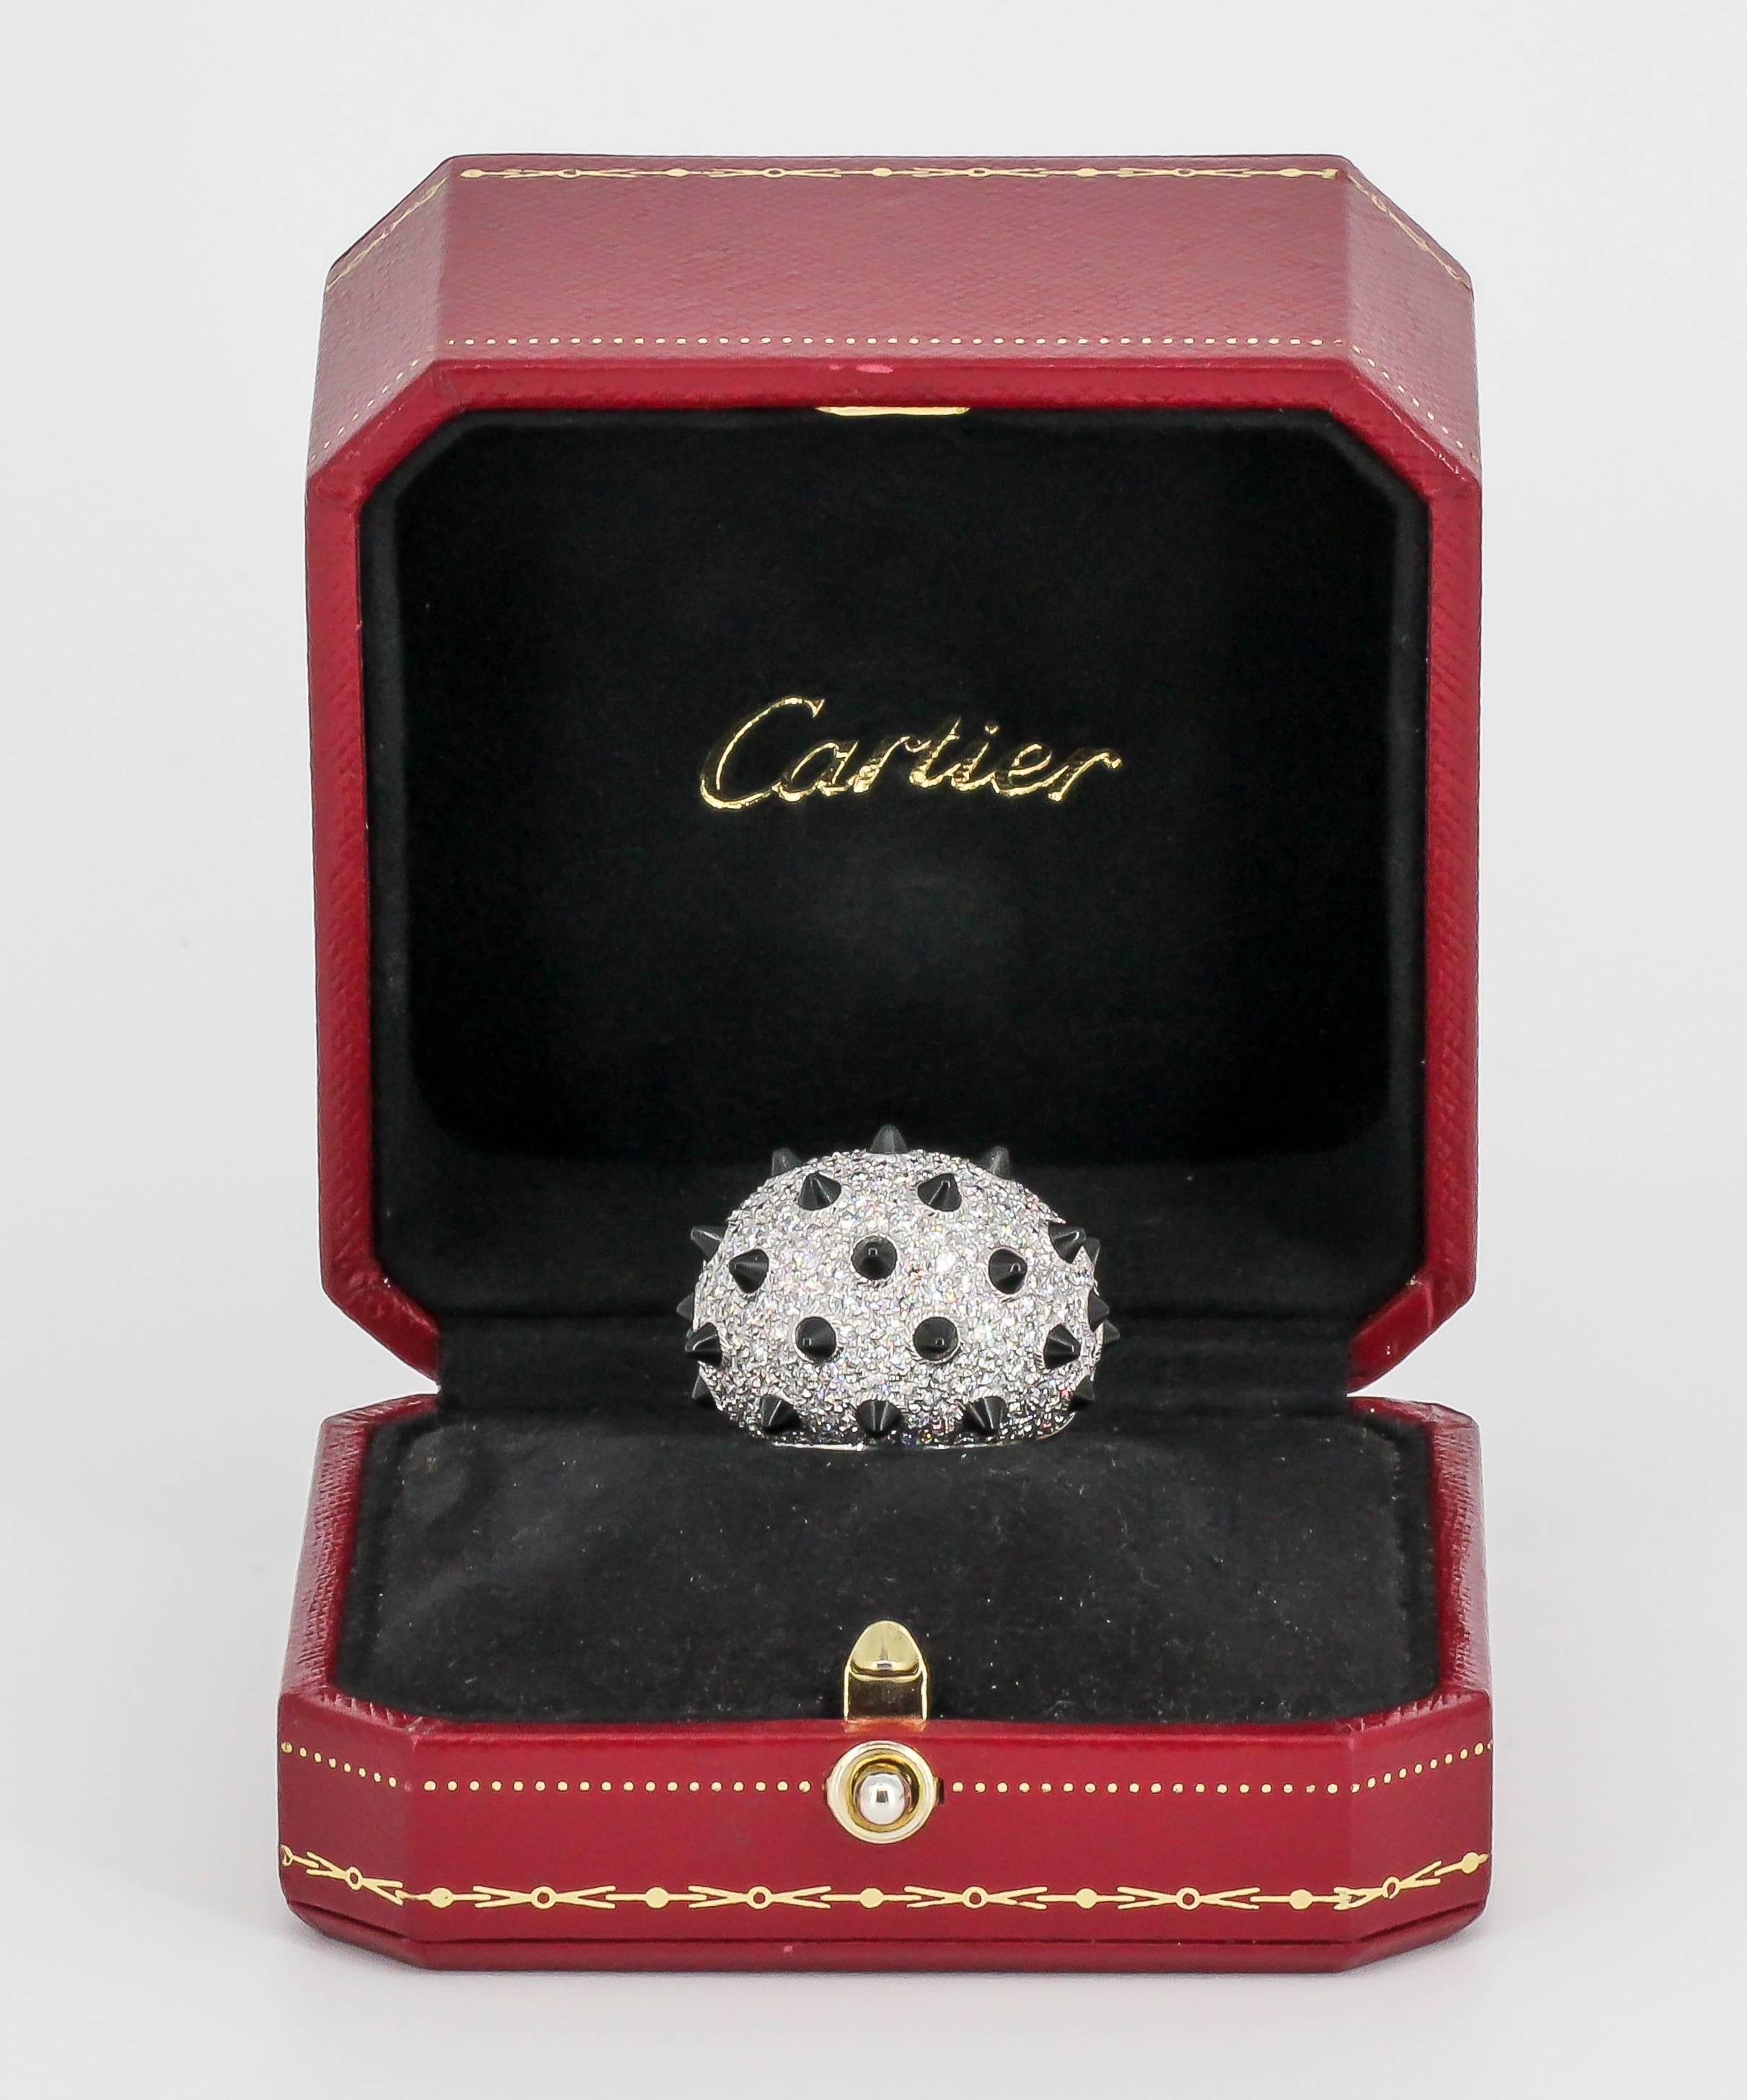 Bold and impressive onyx, diamond and 18k white gold dome ring by Cartier. It features rich black onyx stones fitted like spikes, surrounded by high grade round brilliant cut diamonds throughout, over an 18K white gold setting. Current size 54